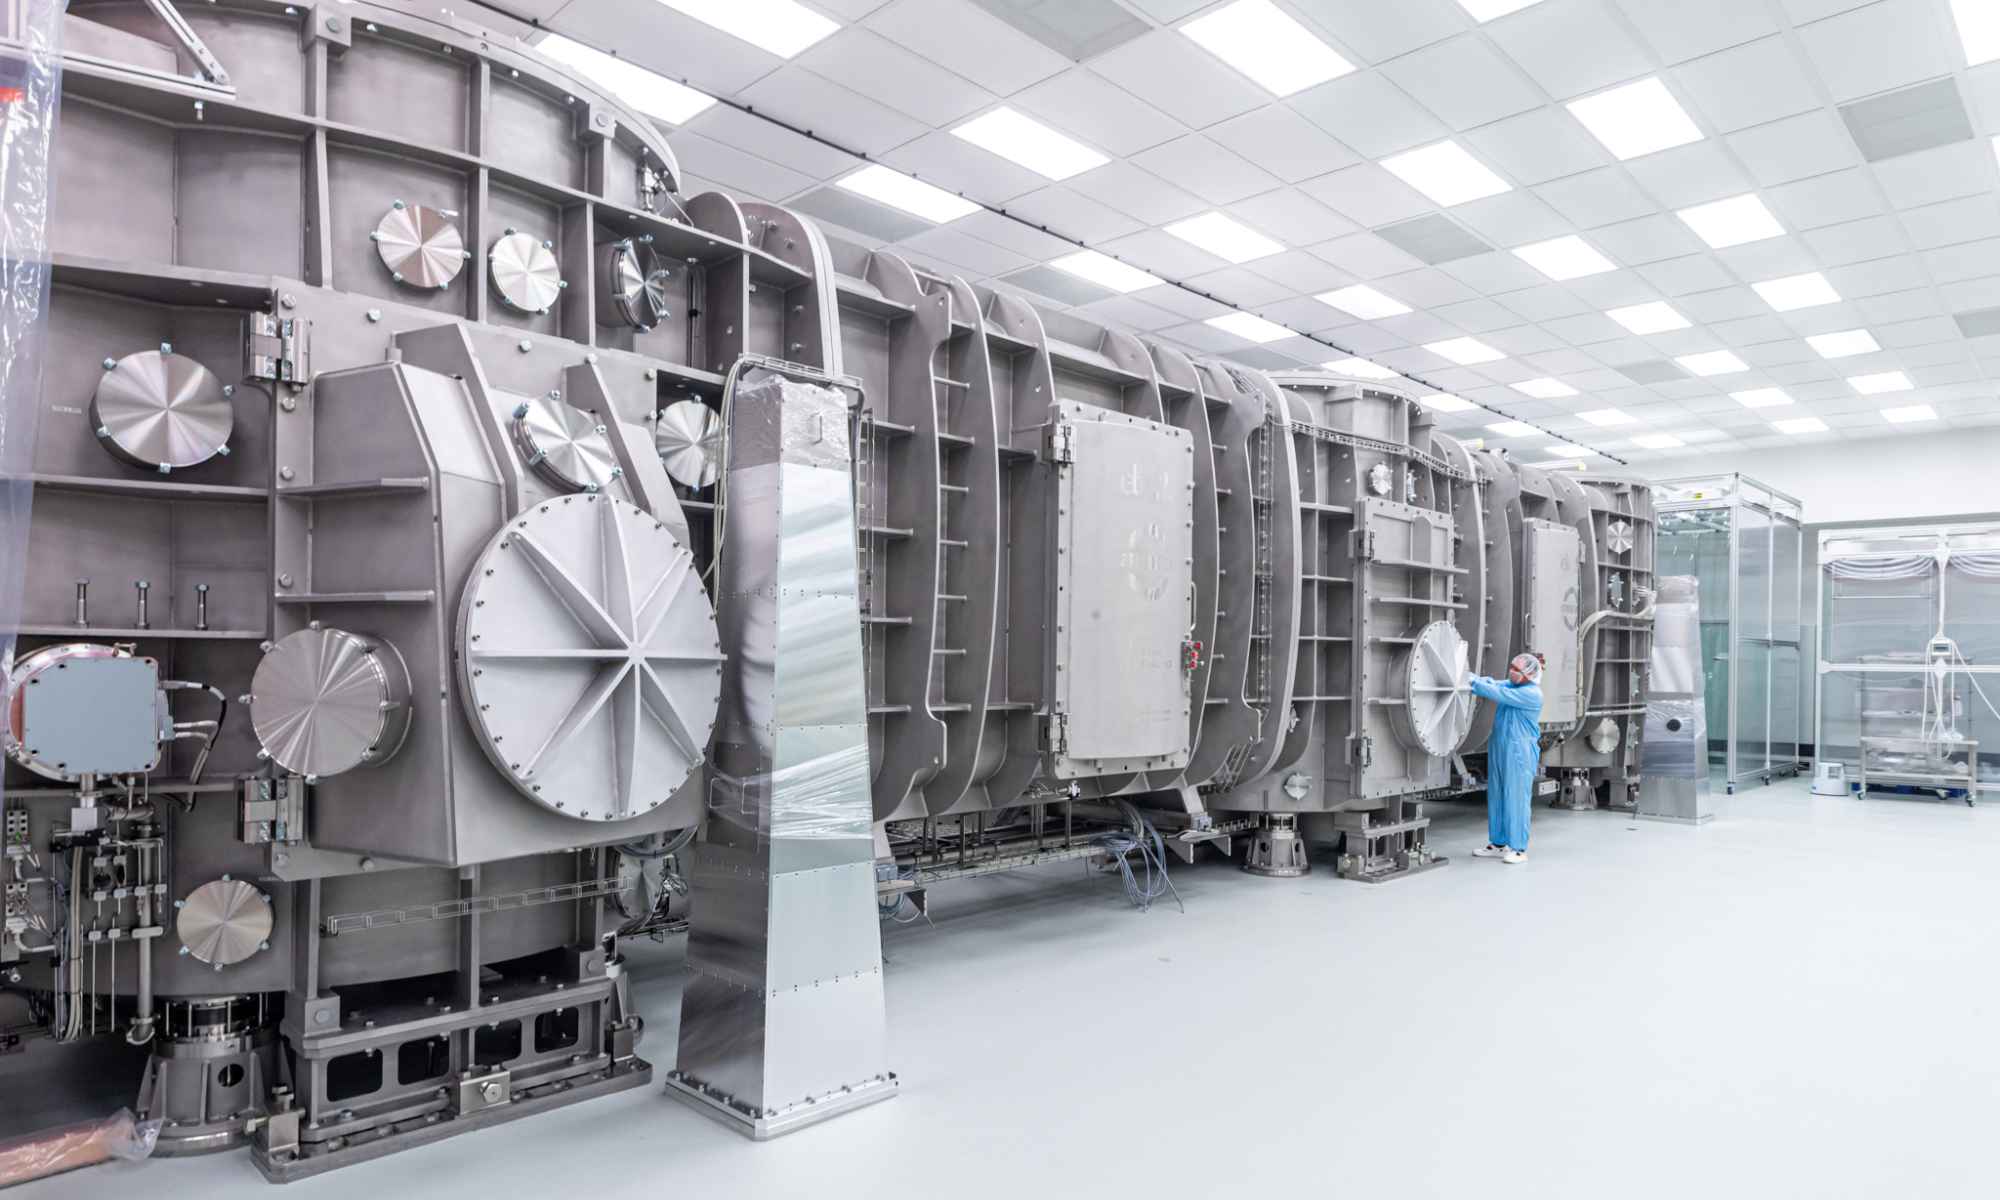 Wide shot of the compressor for generating laser pulses at ELI Beamlines to investigate the feasibility of producing coherent gamma rays. A person in safety gear stands near the instrument.